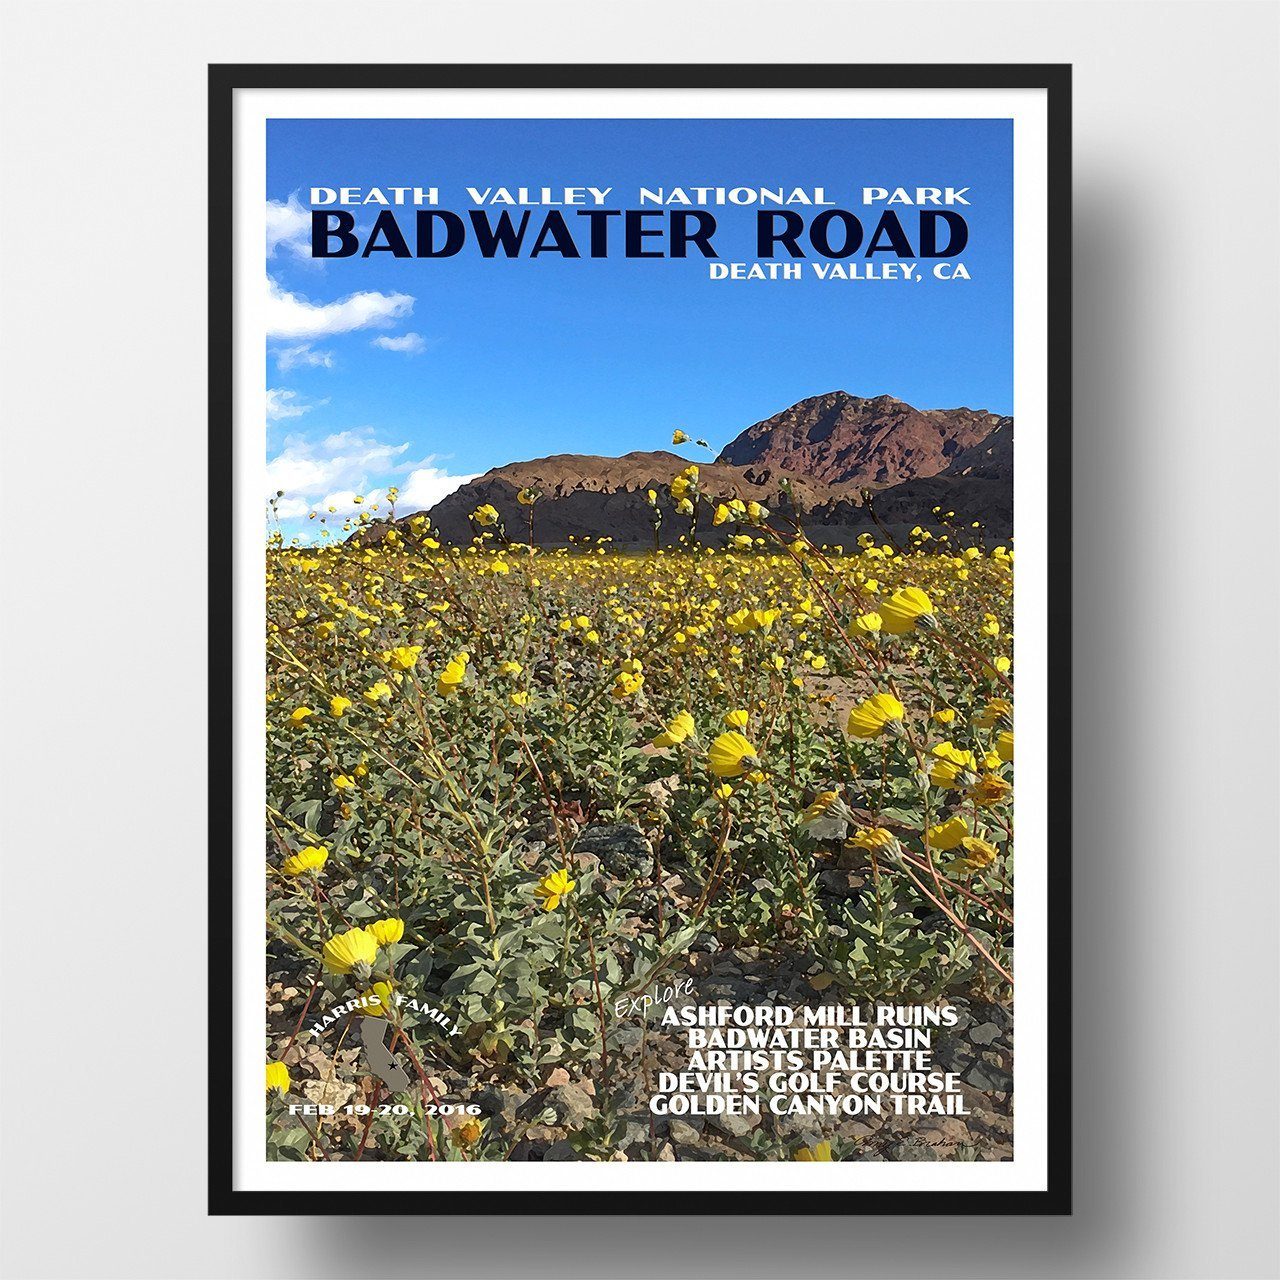 Death Valley National Park Poster-Badwater Road (Personalized)